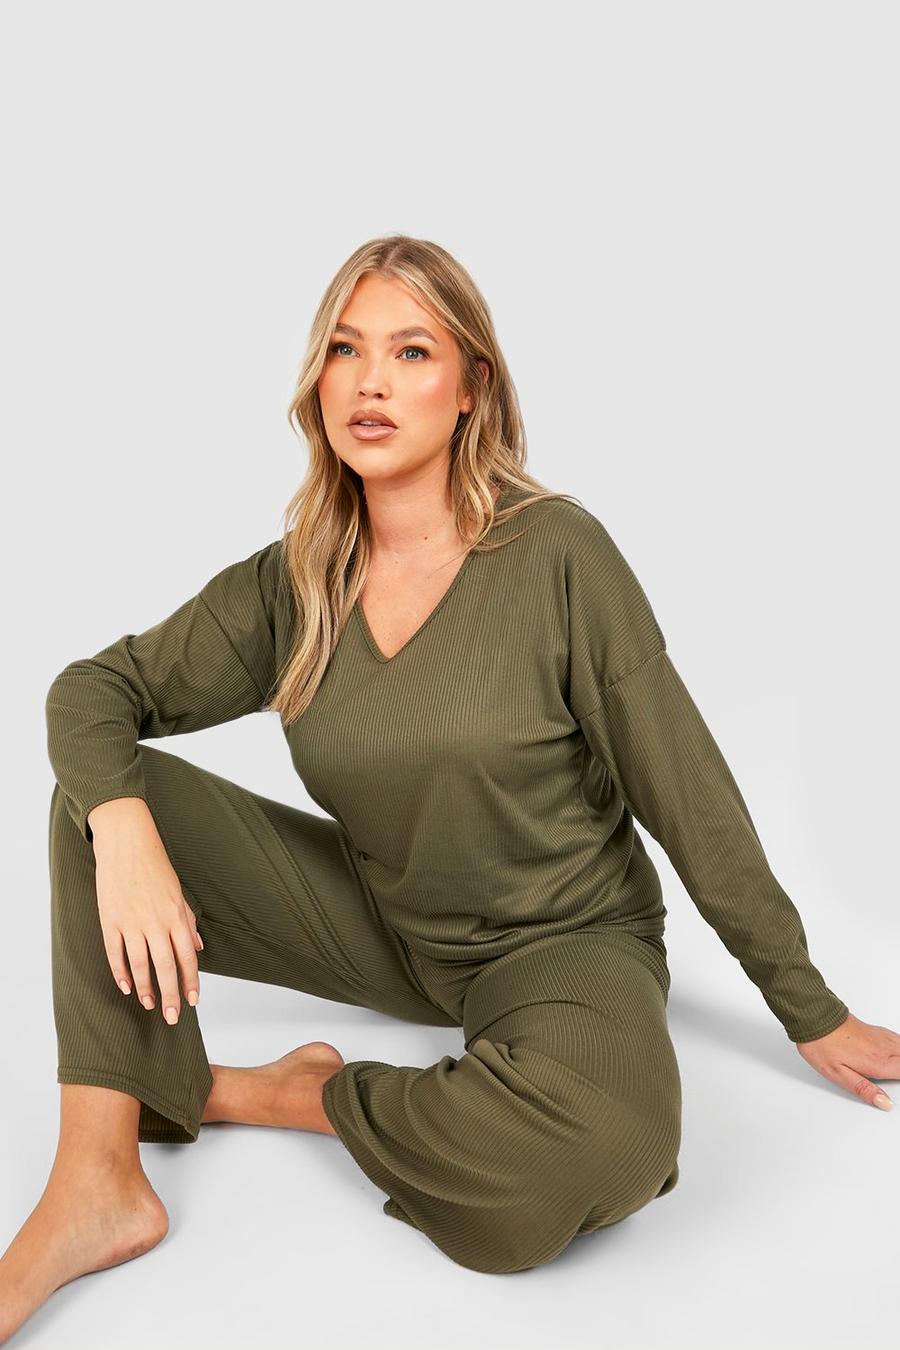 Plus Size Loungewear for Women 2 Piece Short Sleeved Tops and